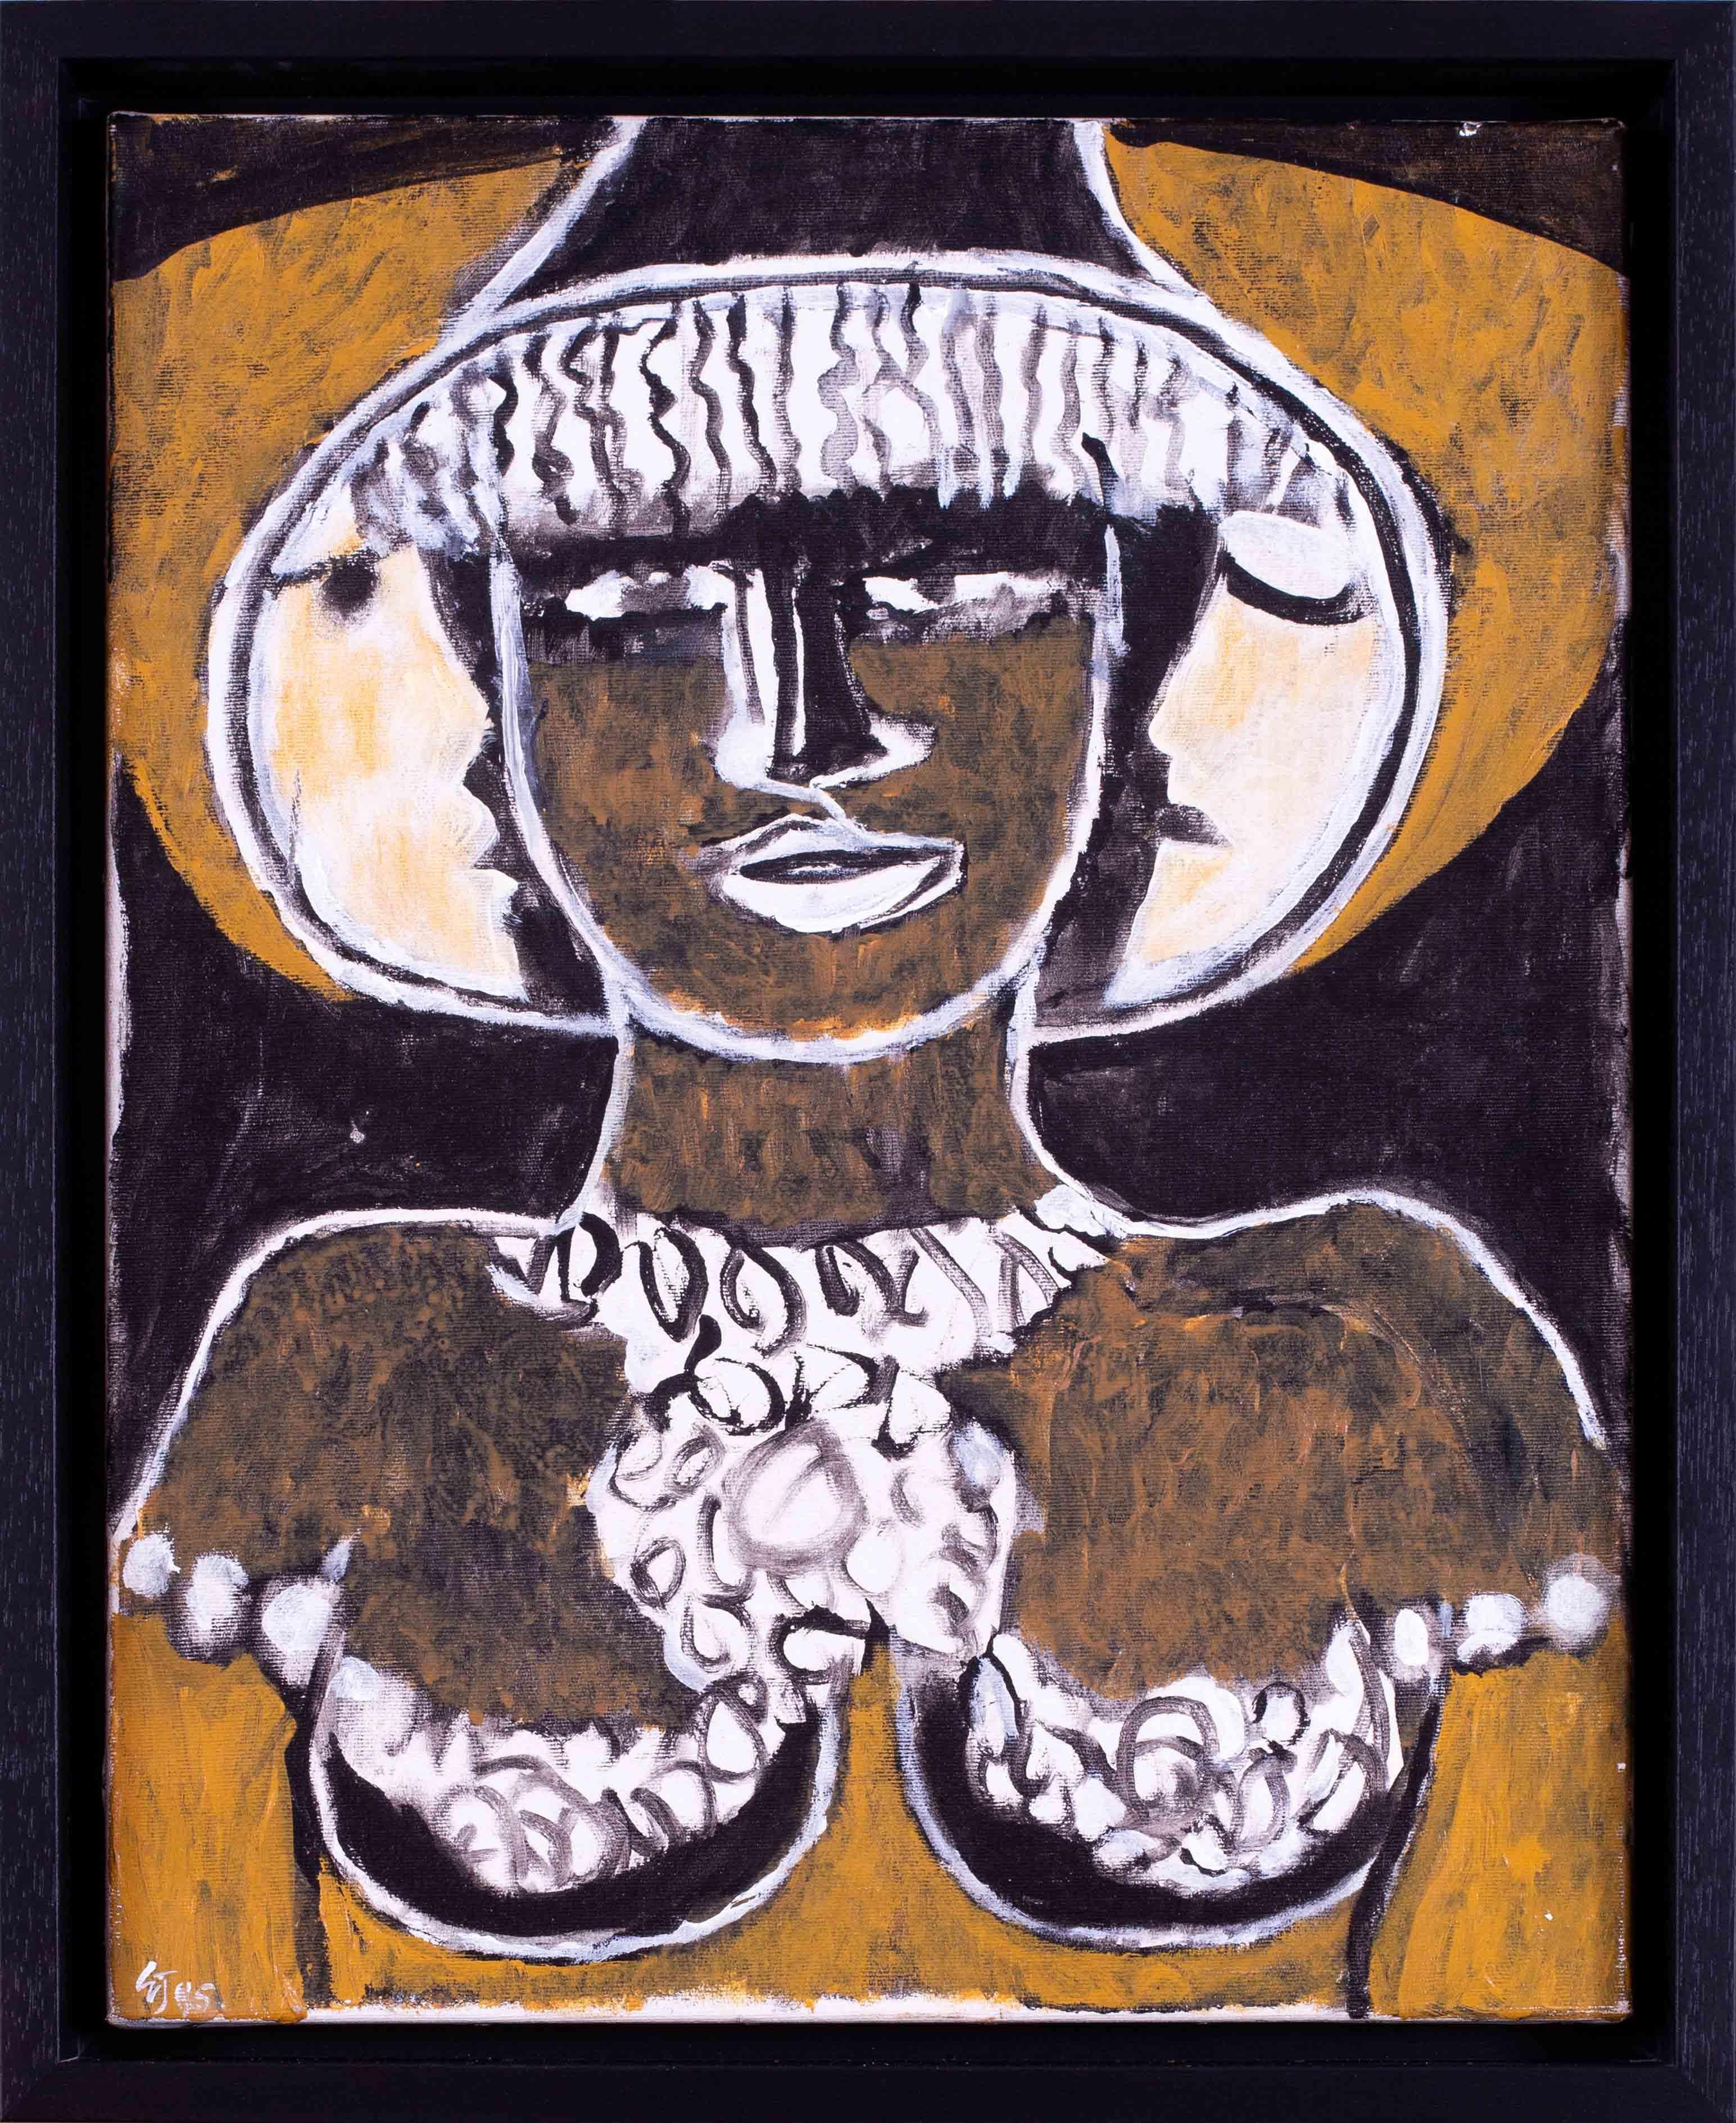 A bold and striking portrait 'Black Hecate' by the notable Modern British artist Ewart Johns.  This painting is characterised by a white, black and brown colour combination with confident brushwork. 

Ewart Johns (British, 1923 – 2013)
Black